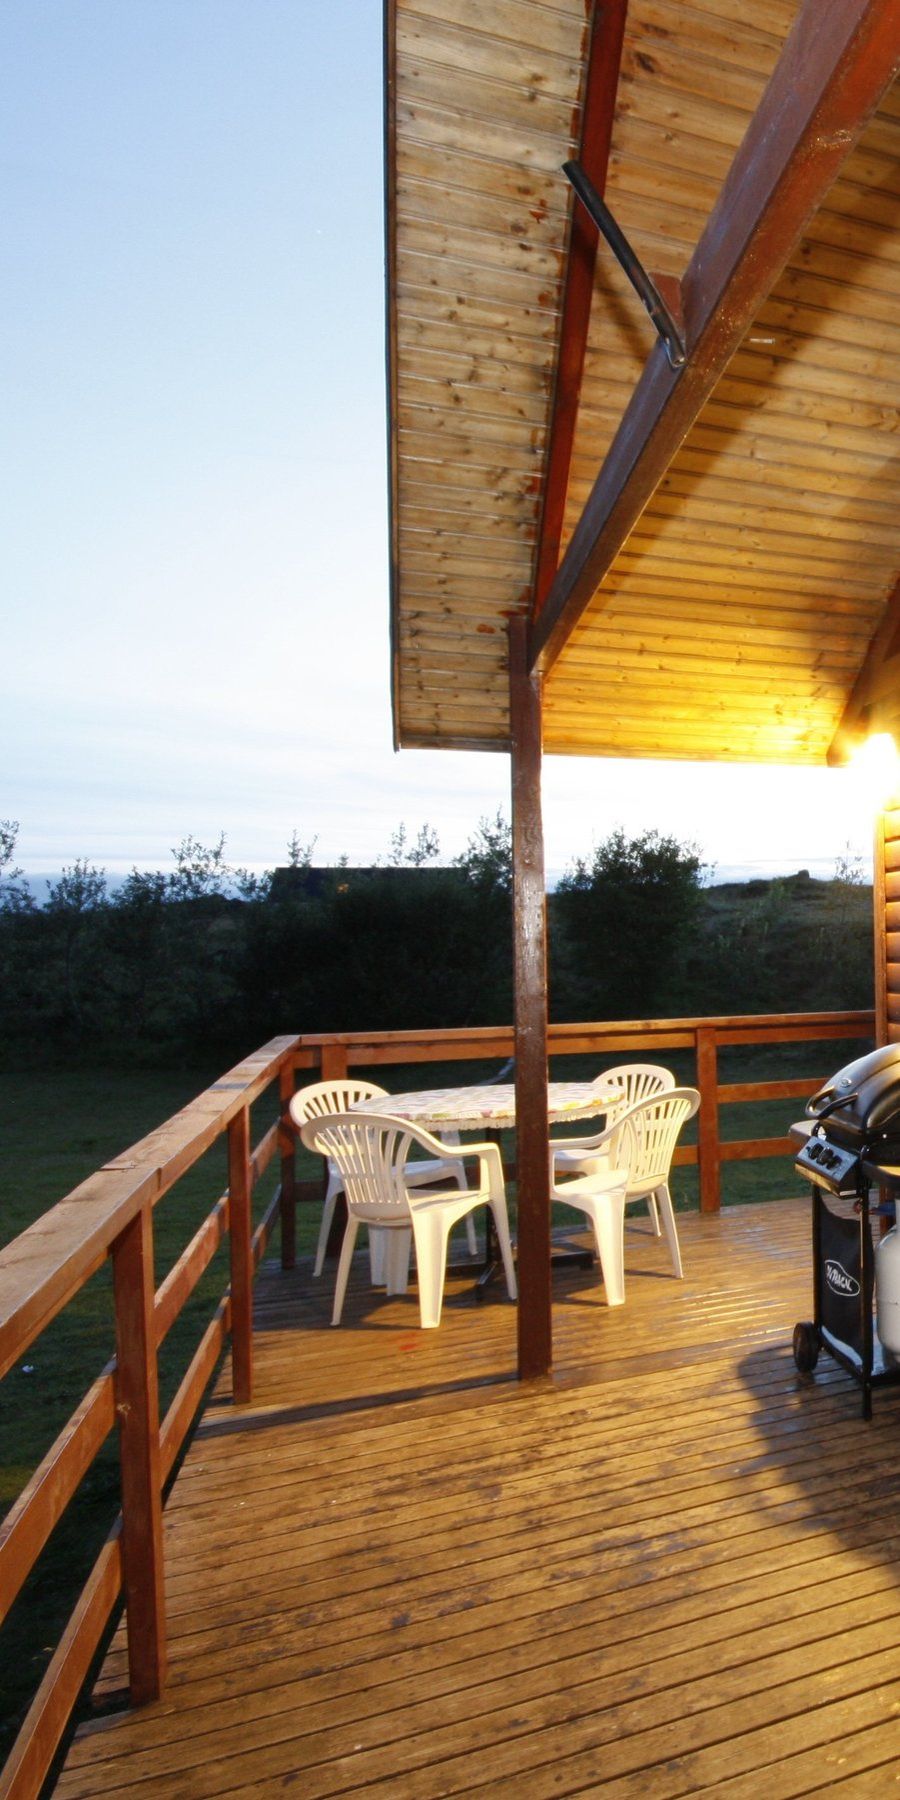 On the terrace there is garden furniture and a gas barbecue